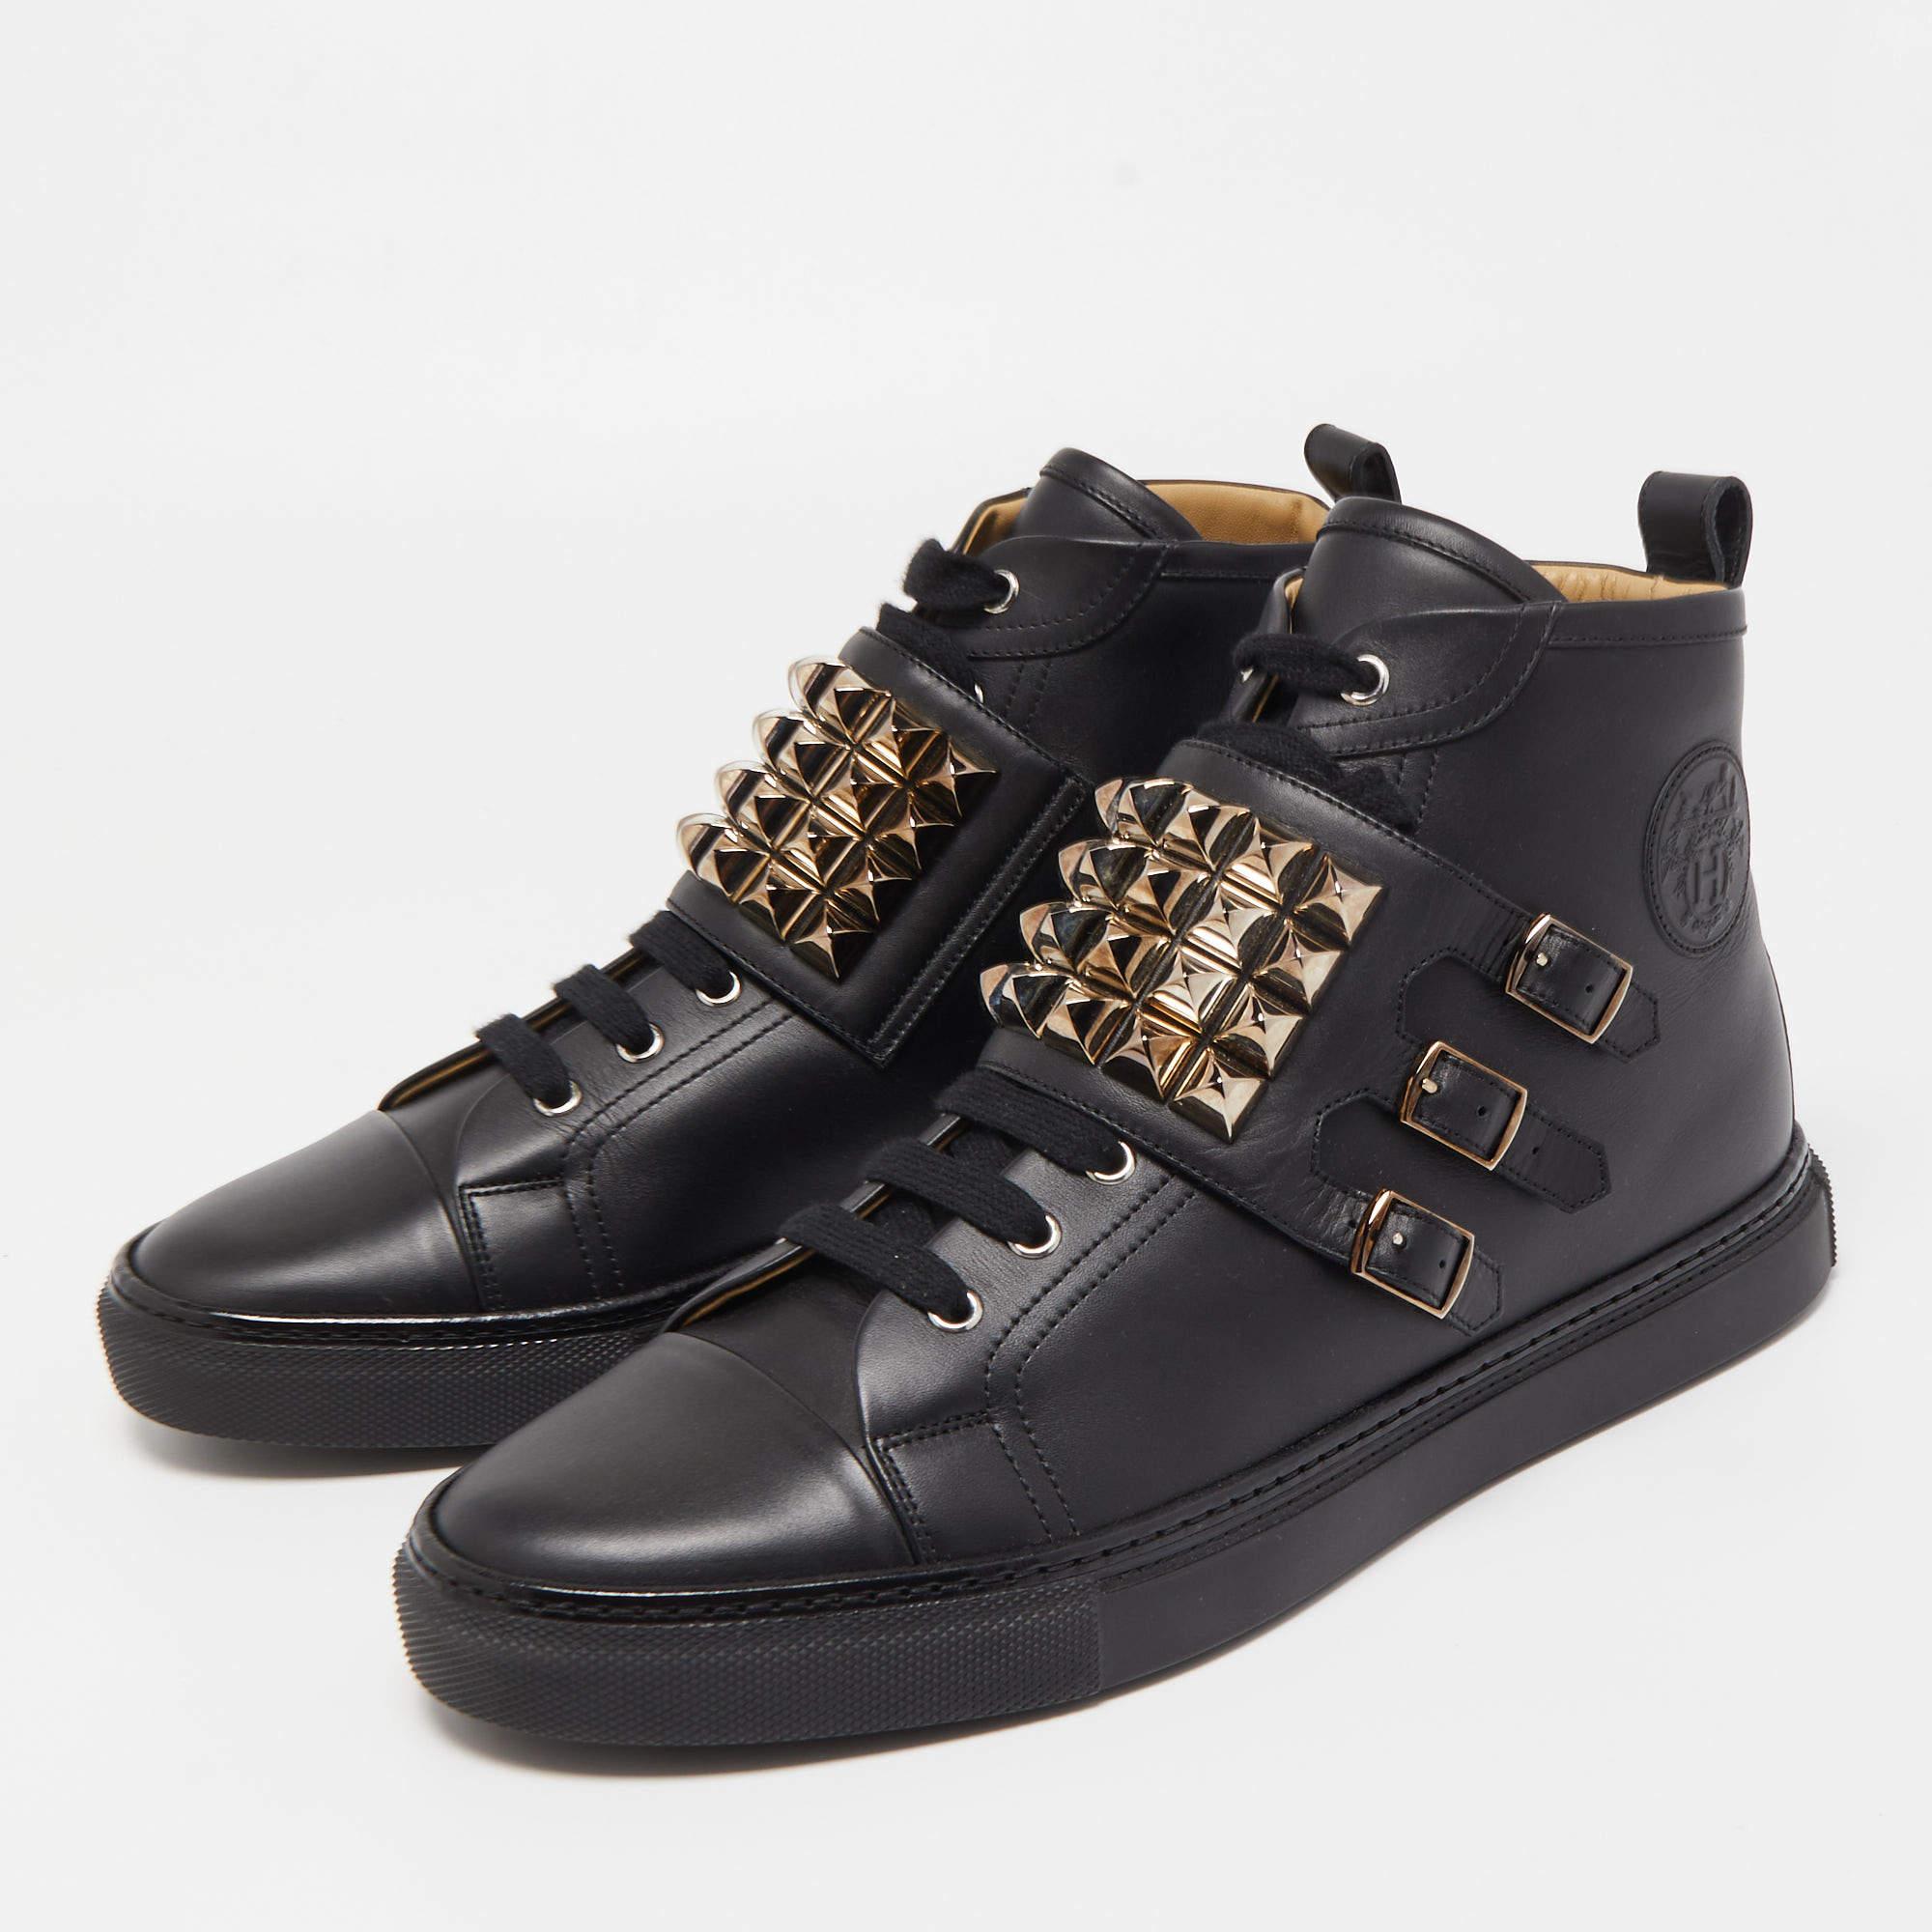 Hermes Black Leather Studded Lennox High Top Sneakers Size 43.5 5